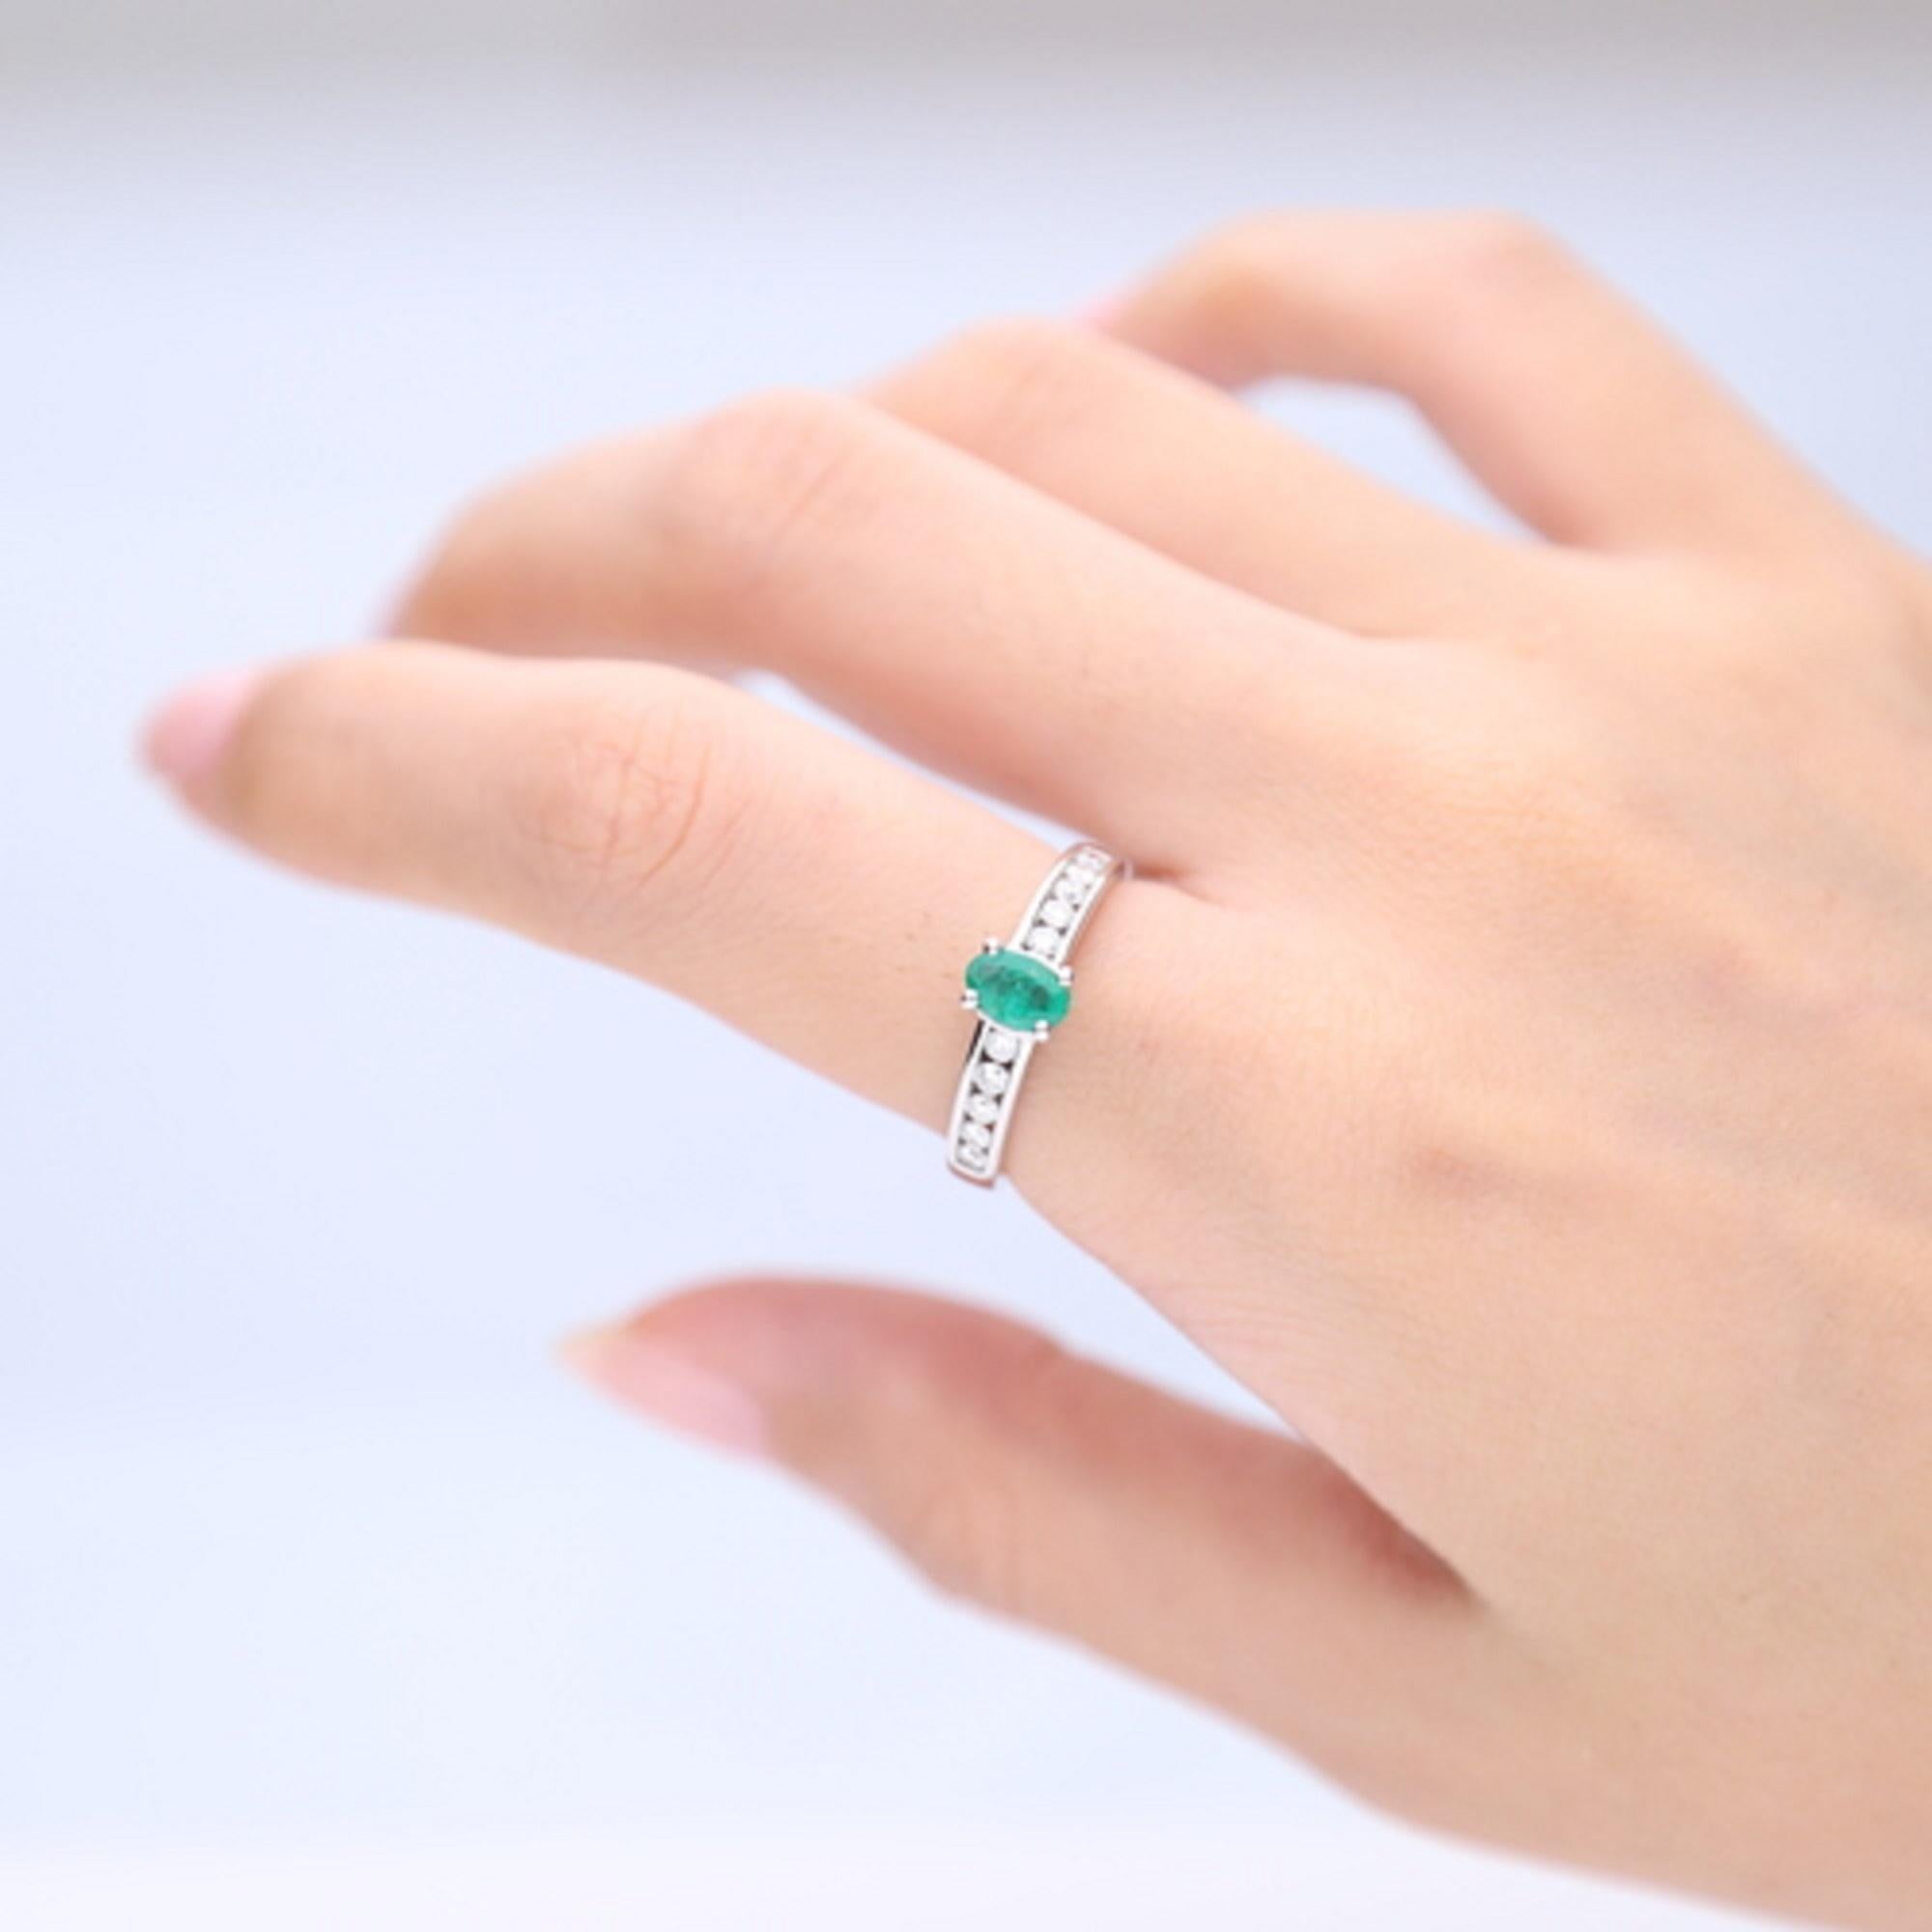 Stunning, timeless and classy eternity Unique Ring. Decorate yourself in luxury with this Gin & Grace Ring. The 14k White Gold jewelry boasts Oval cut Prong Setting Natural Emerald (1 pcs) 0.43 Carat, along with Natural Round cut white Diamond (10